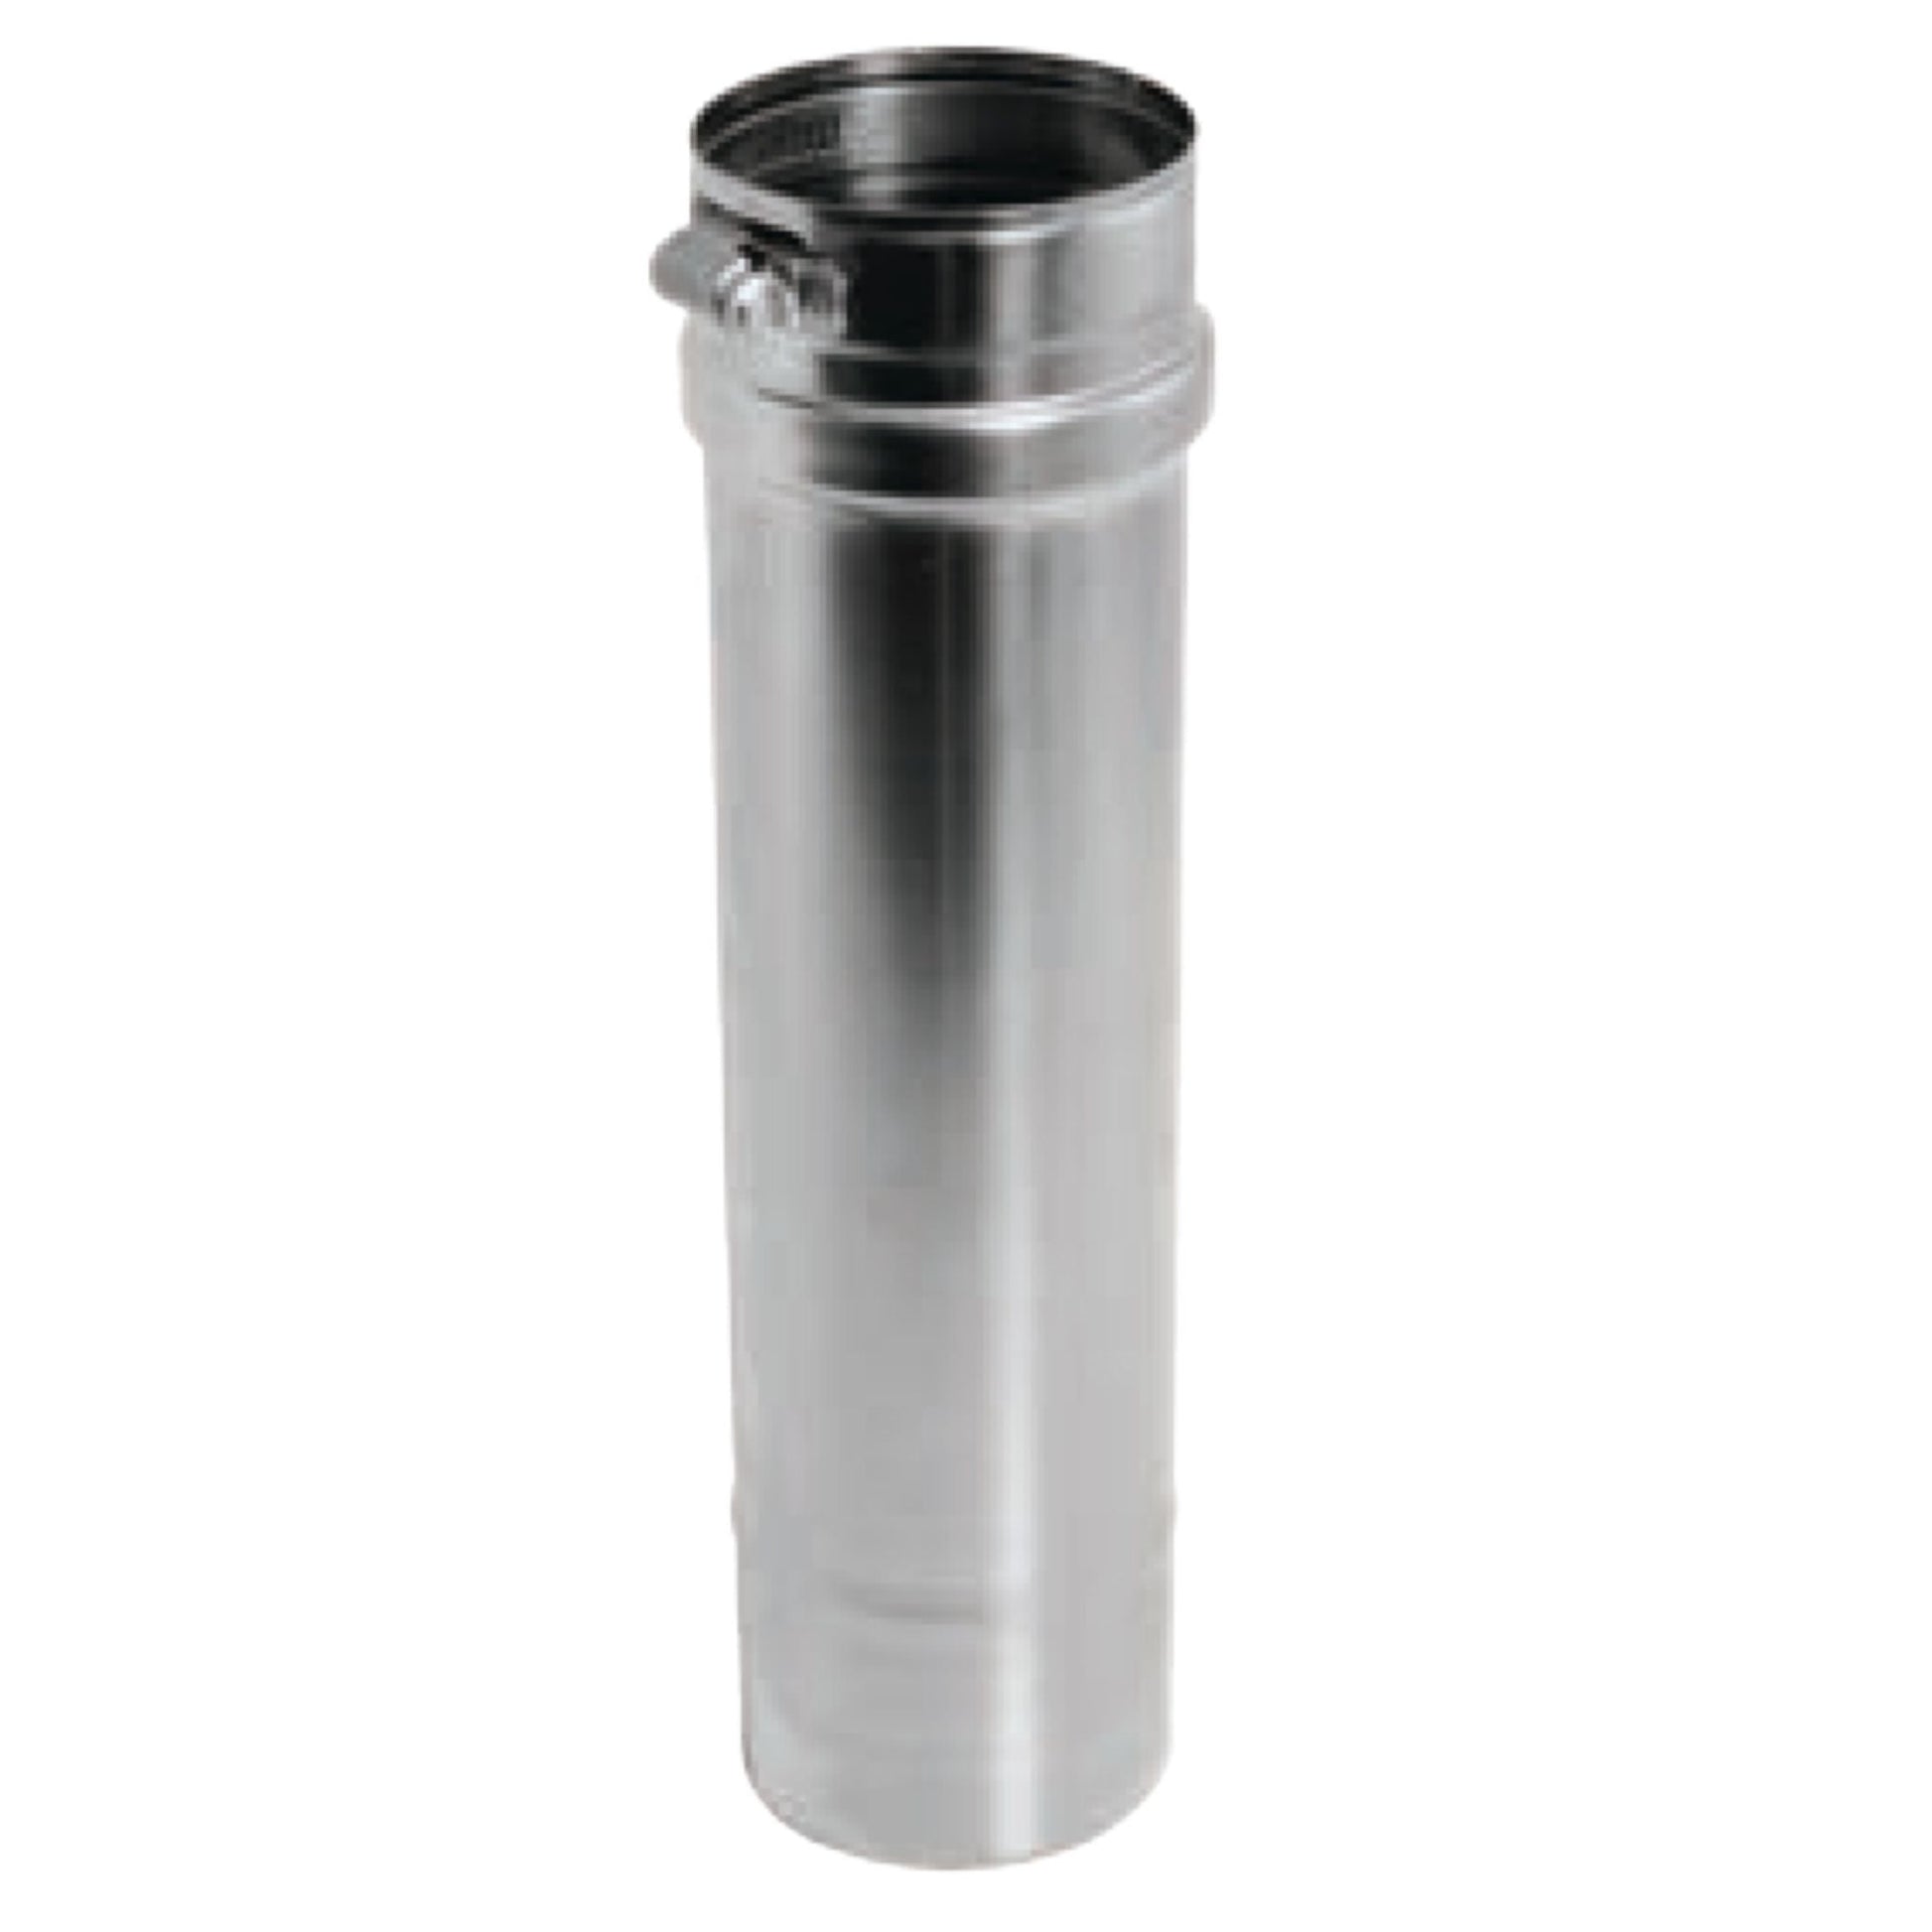 DuraVent FasNSeal 10" x 6" 316L Stainless Steel Vent Length